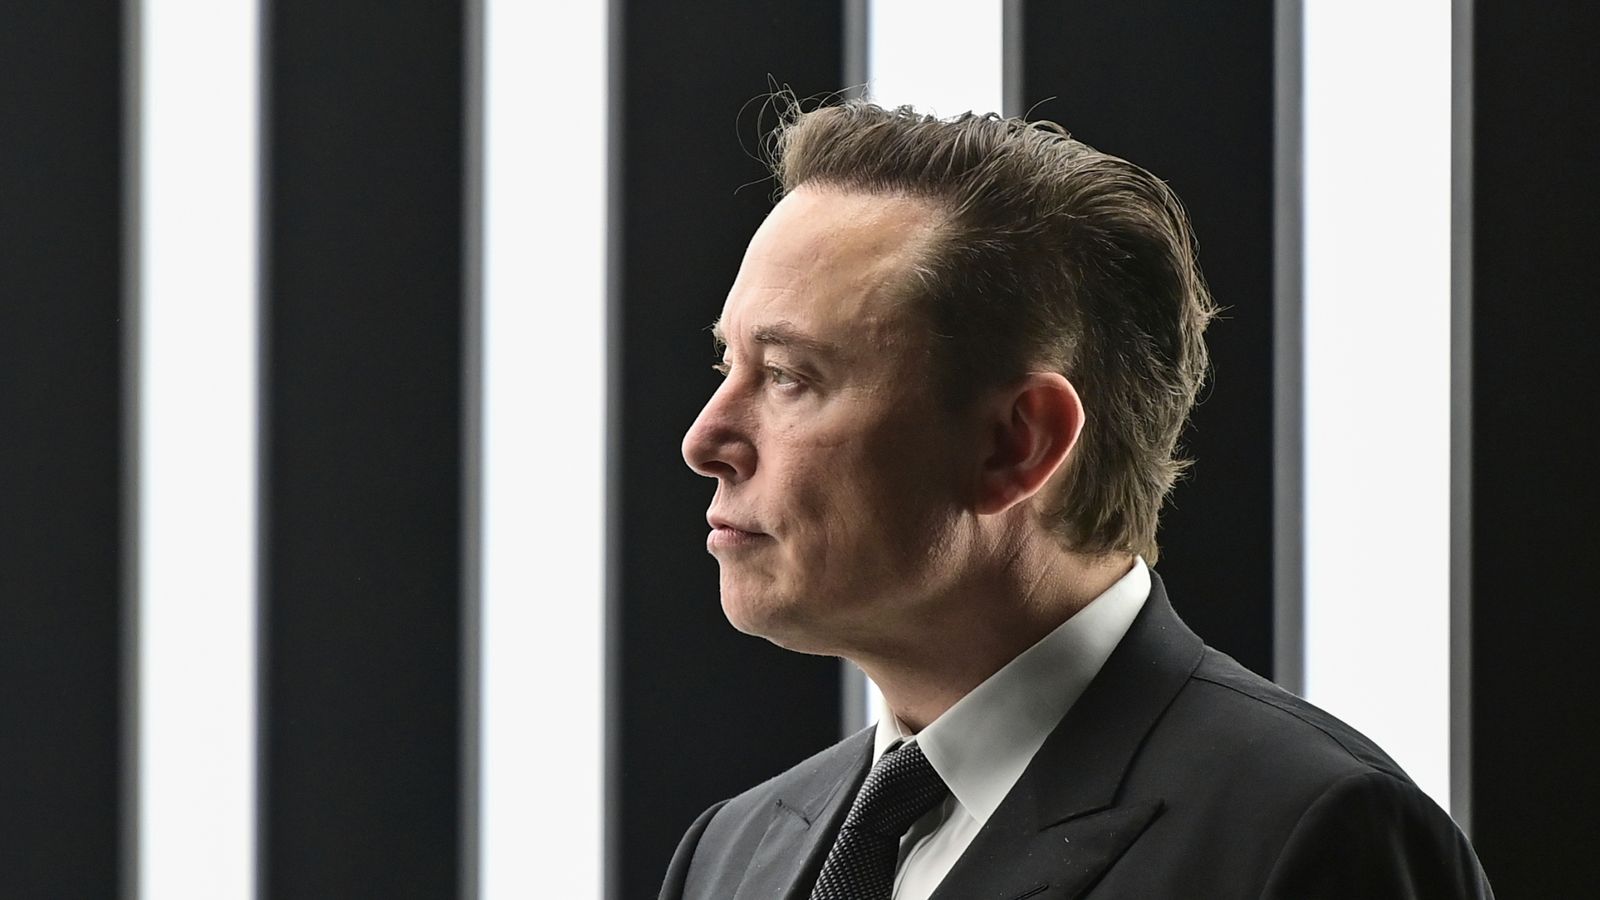 Elon Musk's medical firm Neuralink accused of welfare violations after killing 1,500 animals in four years - report